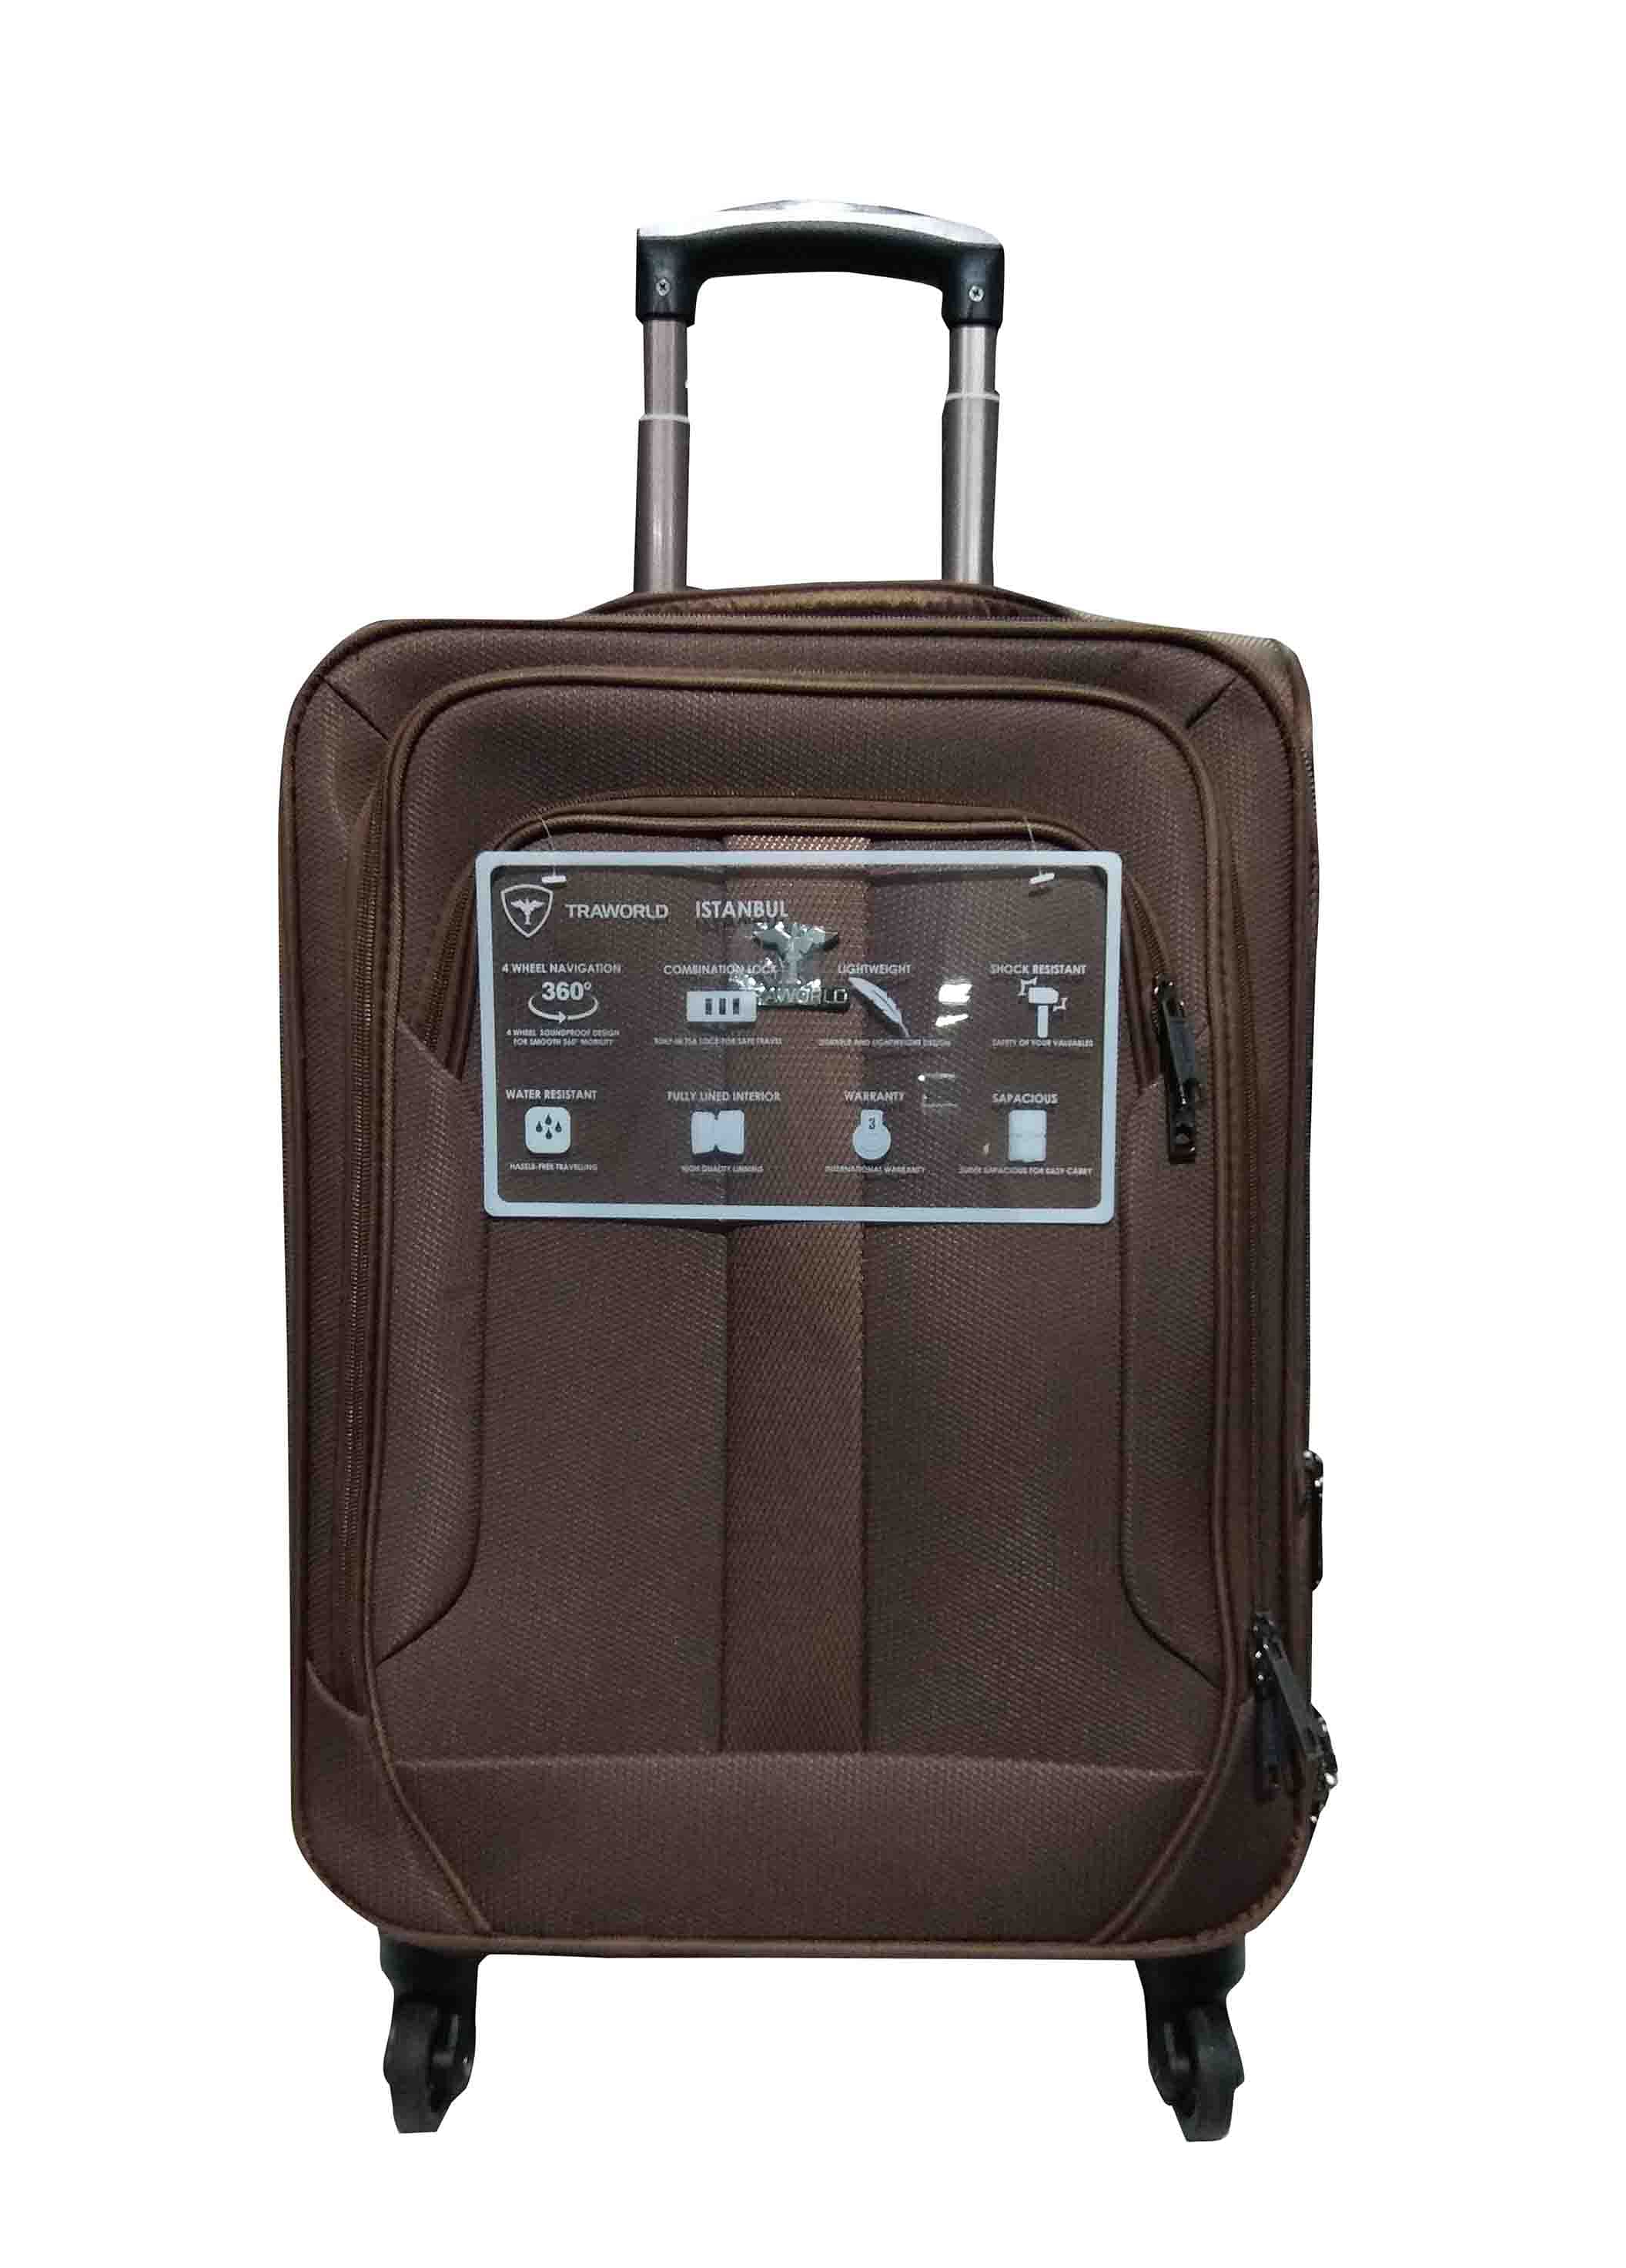 Traworld 4 Wheel Soft Trolley Bag, 1, Size: 28 Inch at Rs 4500 in Ahmedabad